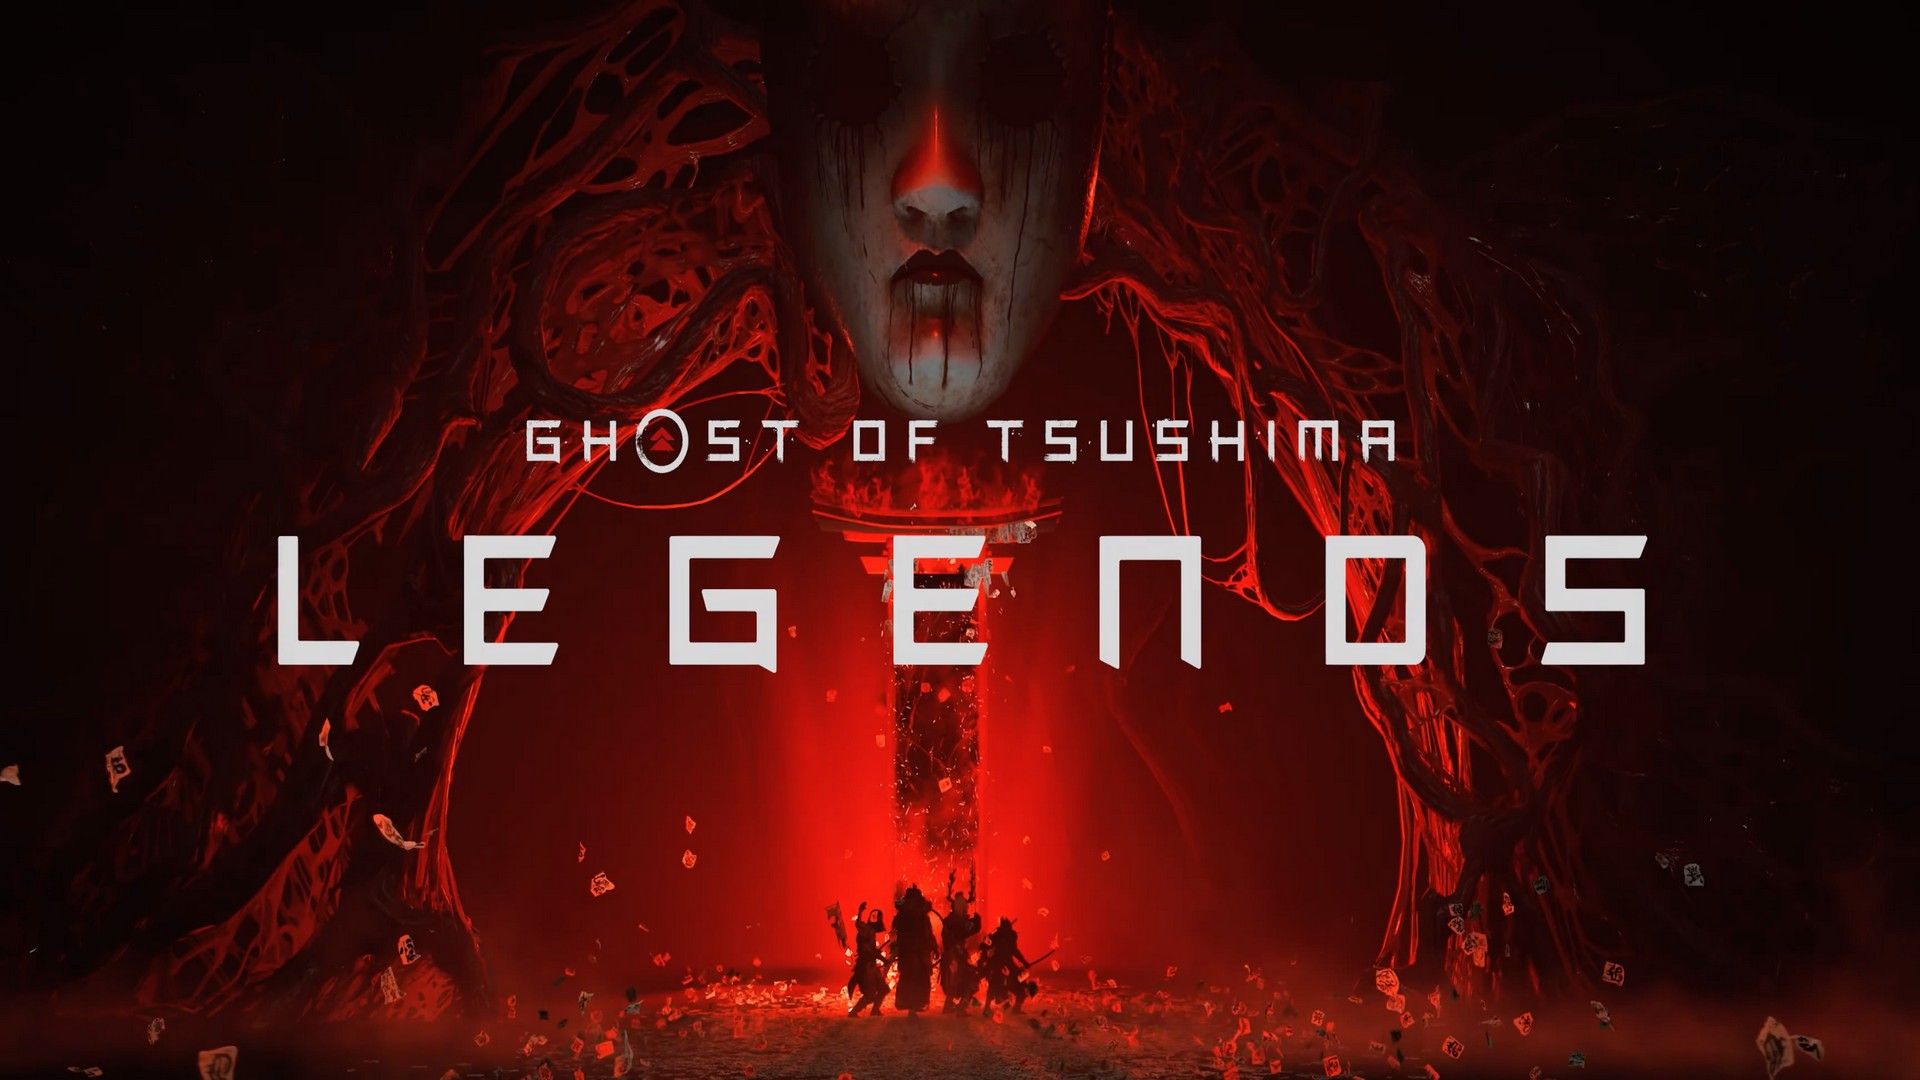 Ghost of Tsushima tailored for anime lovers